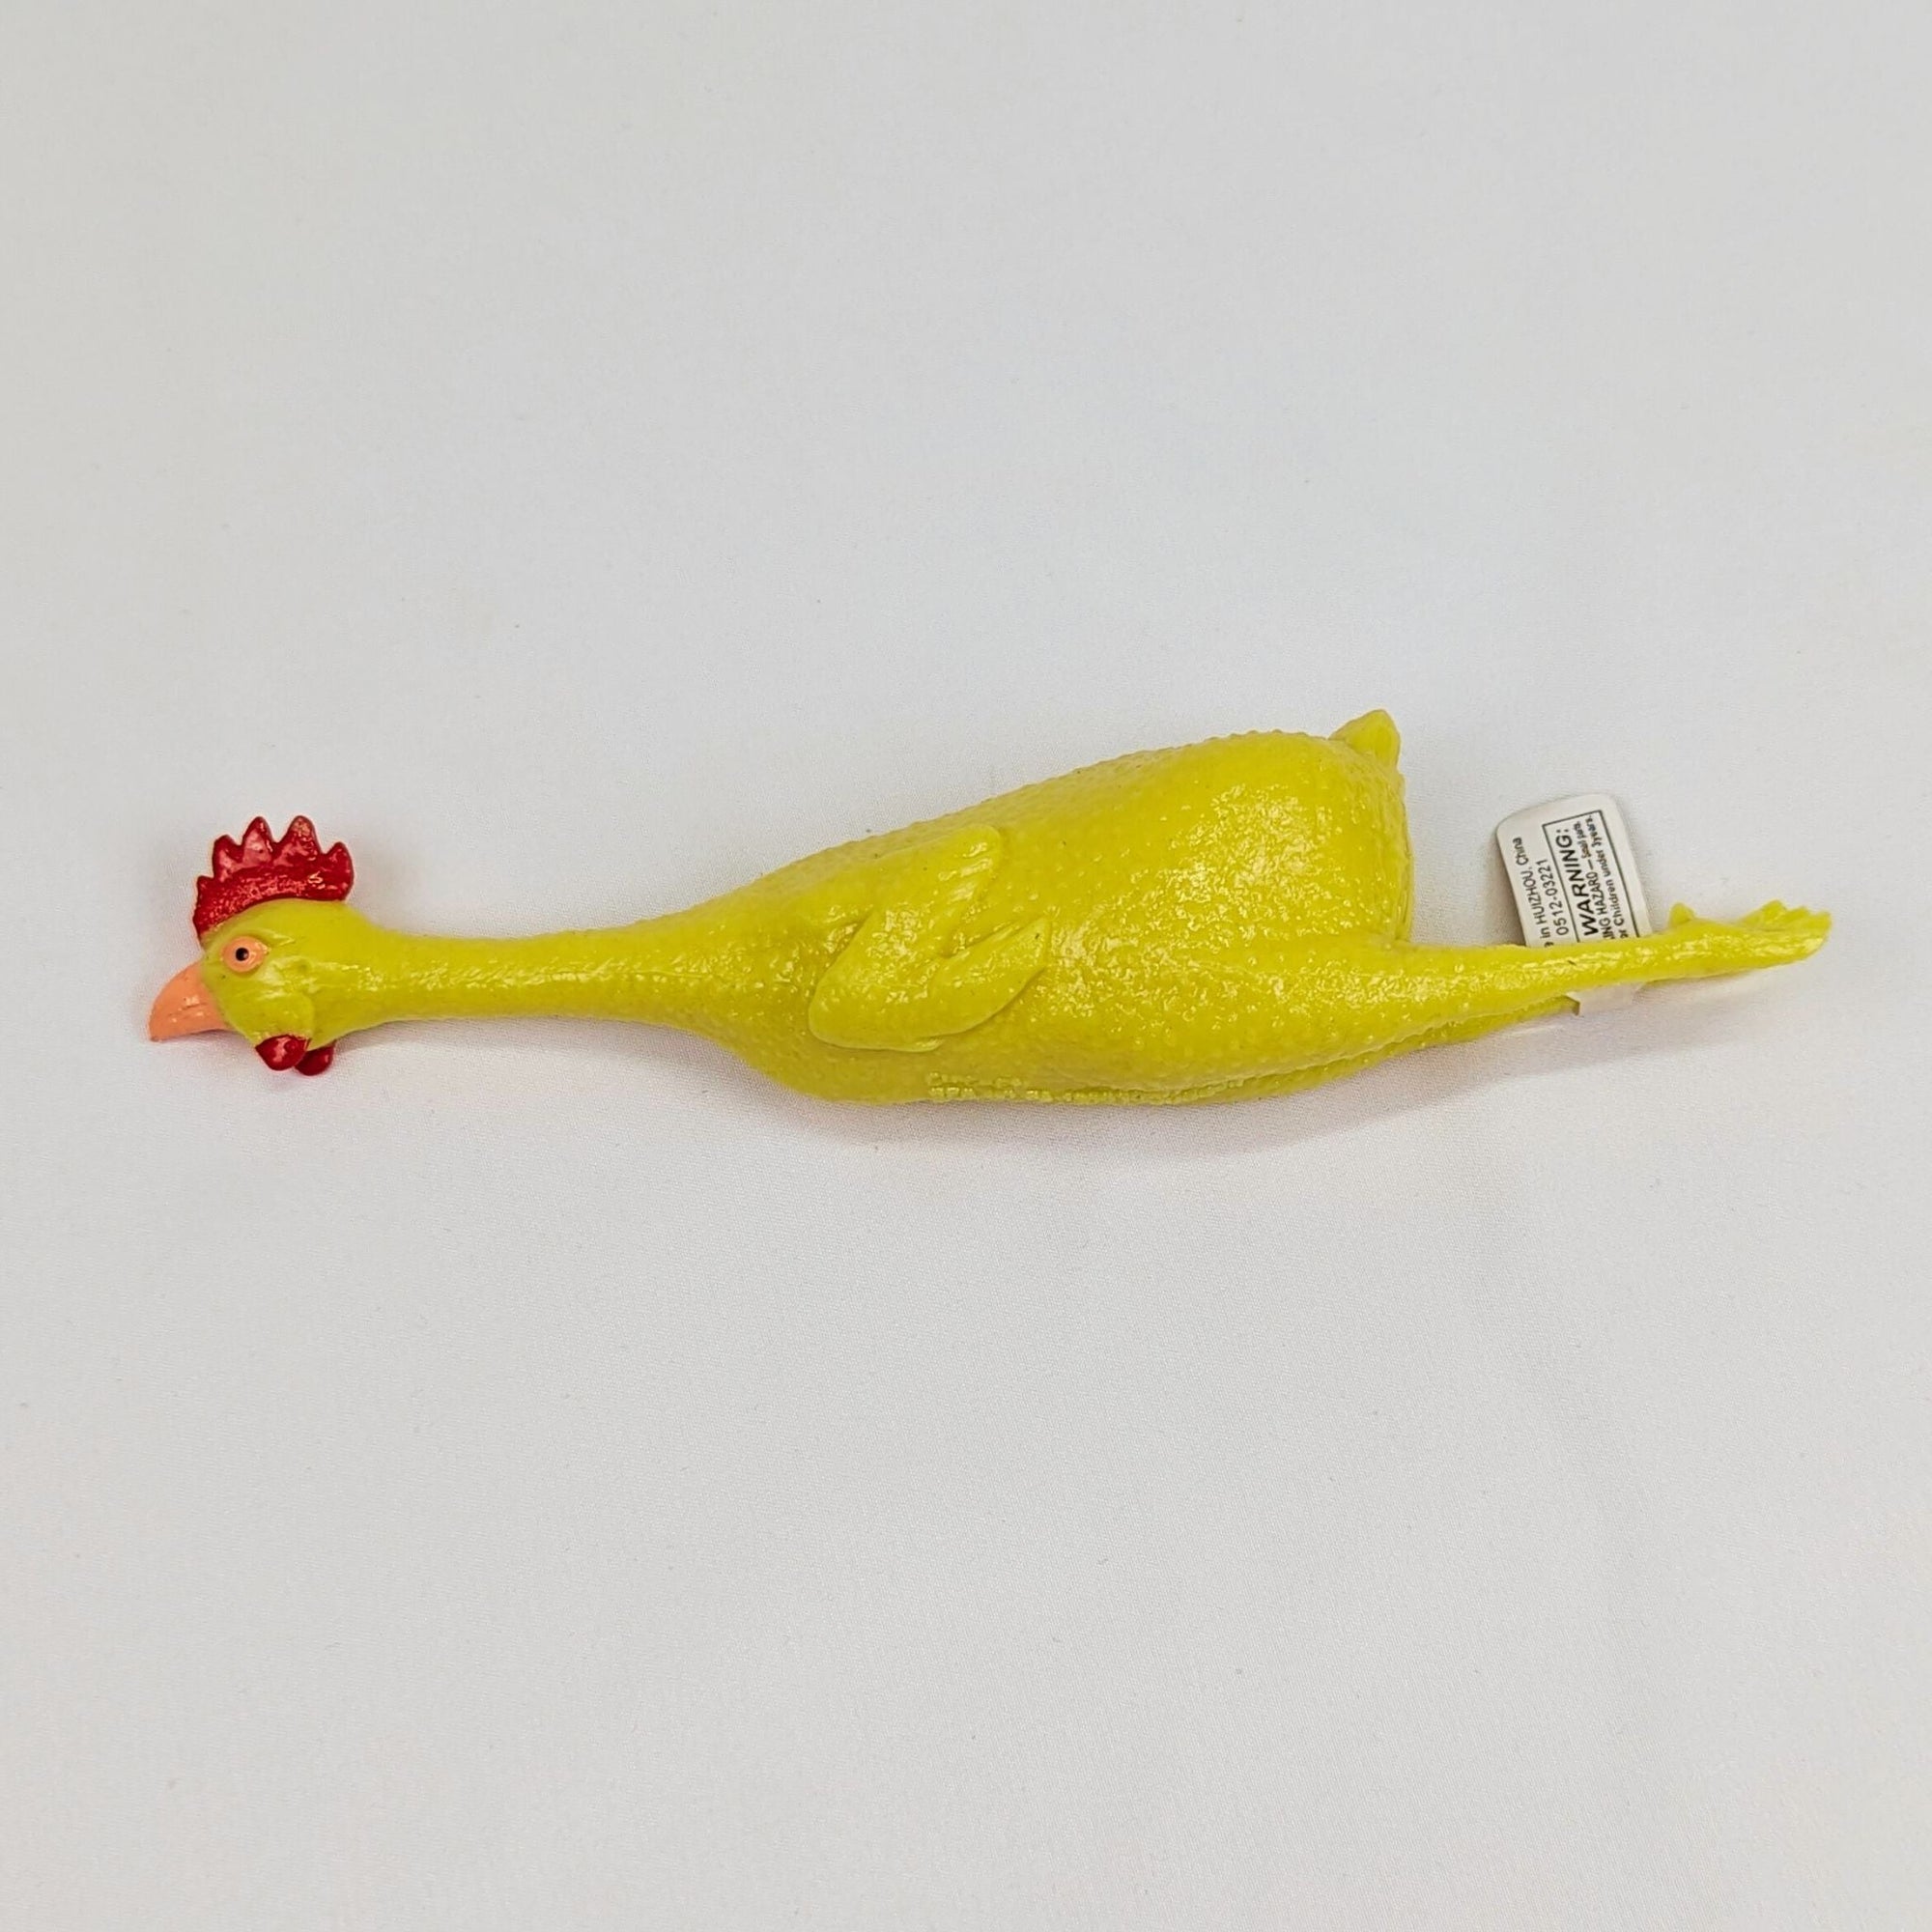 8" Rubber Stretch Chicken Toy - Cluck It All Farms